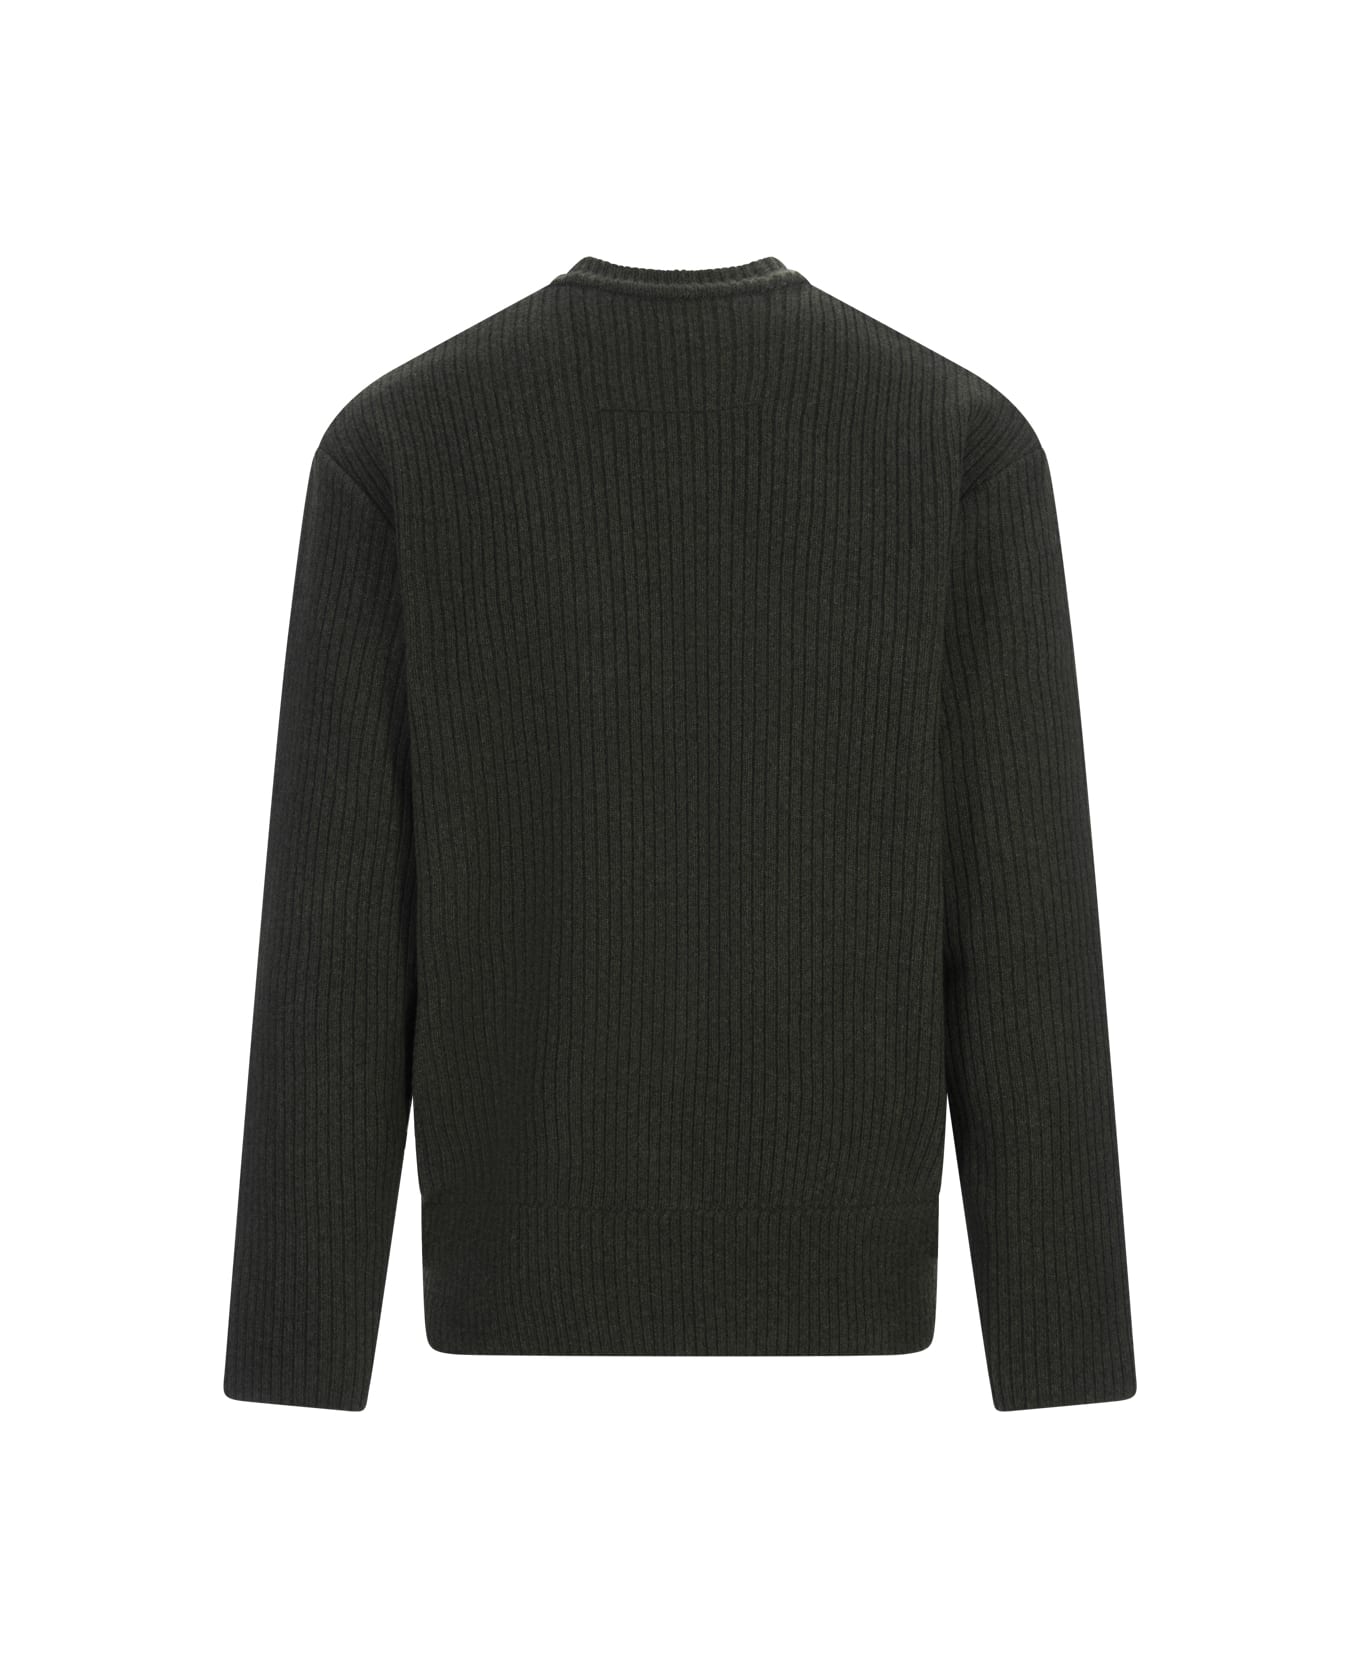 Givenchy Ribbed Sweater - Green